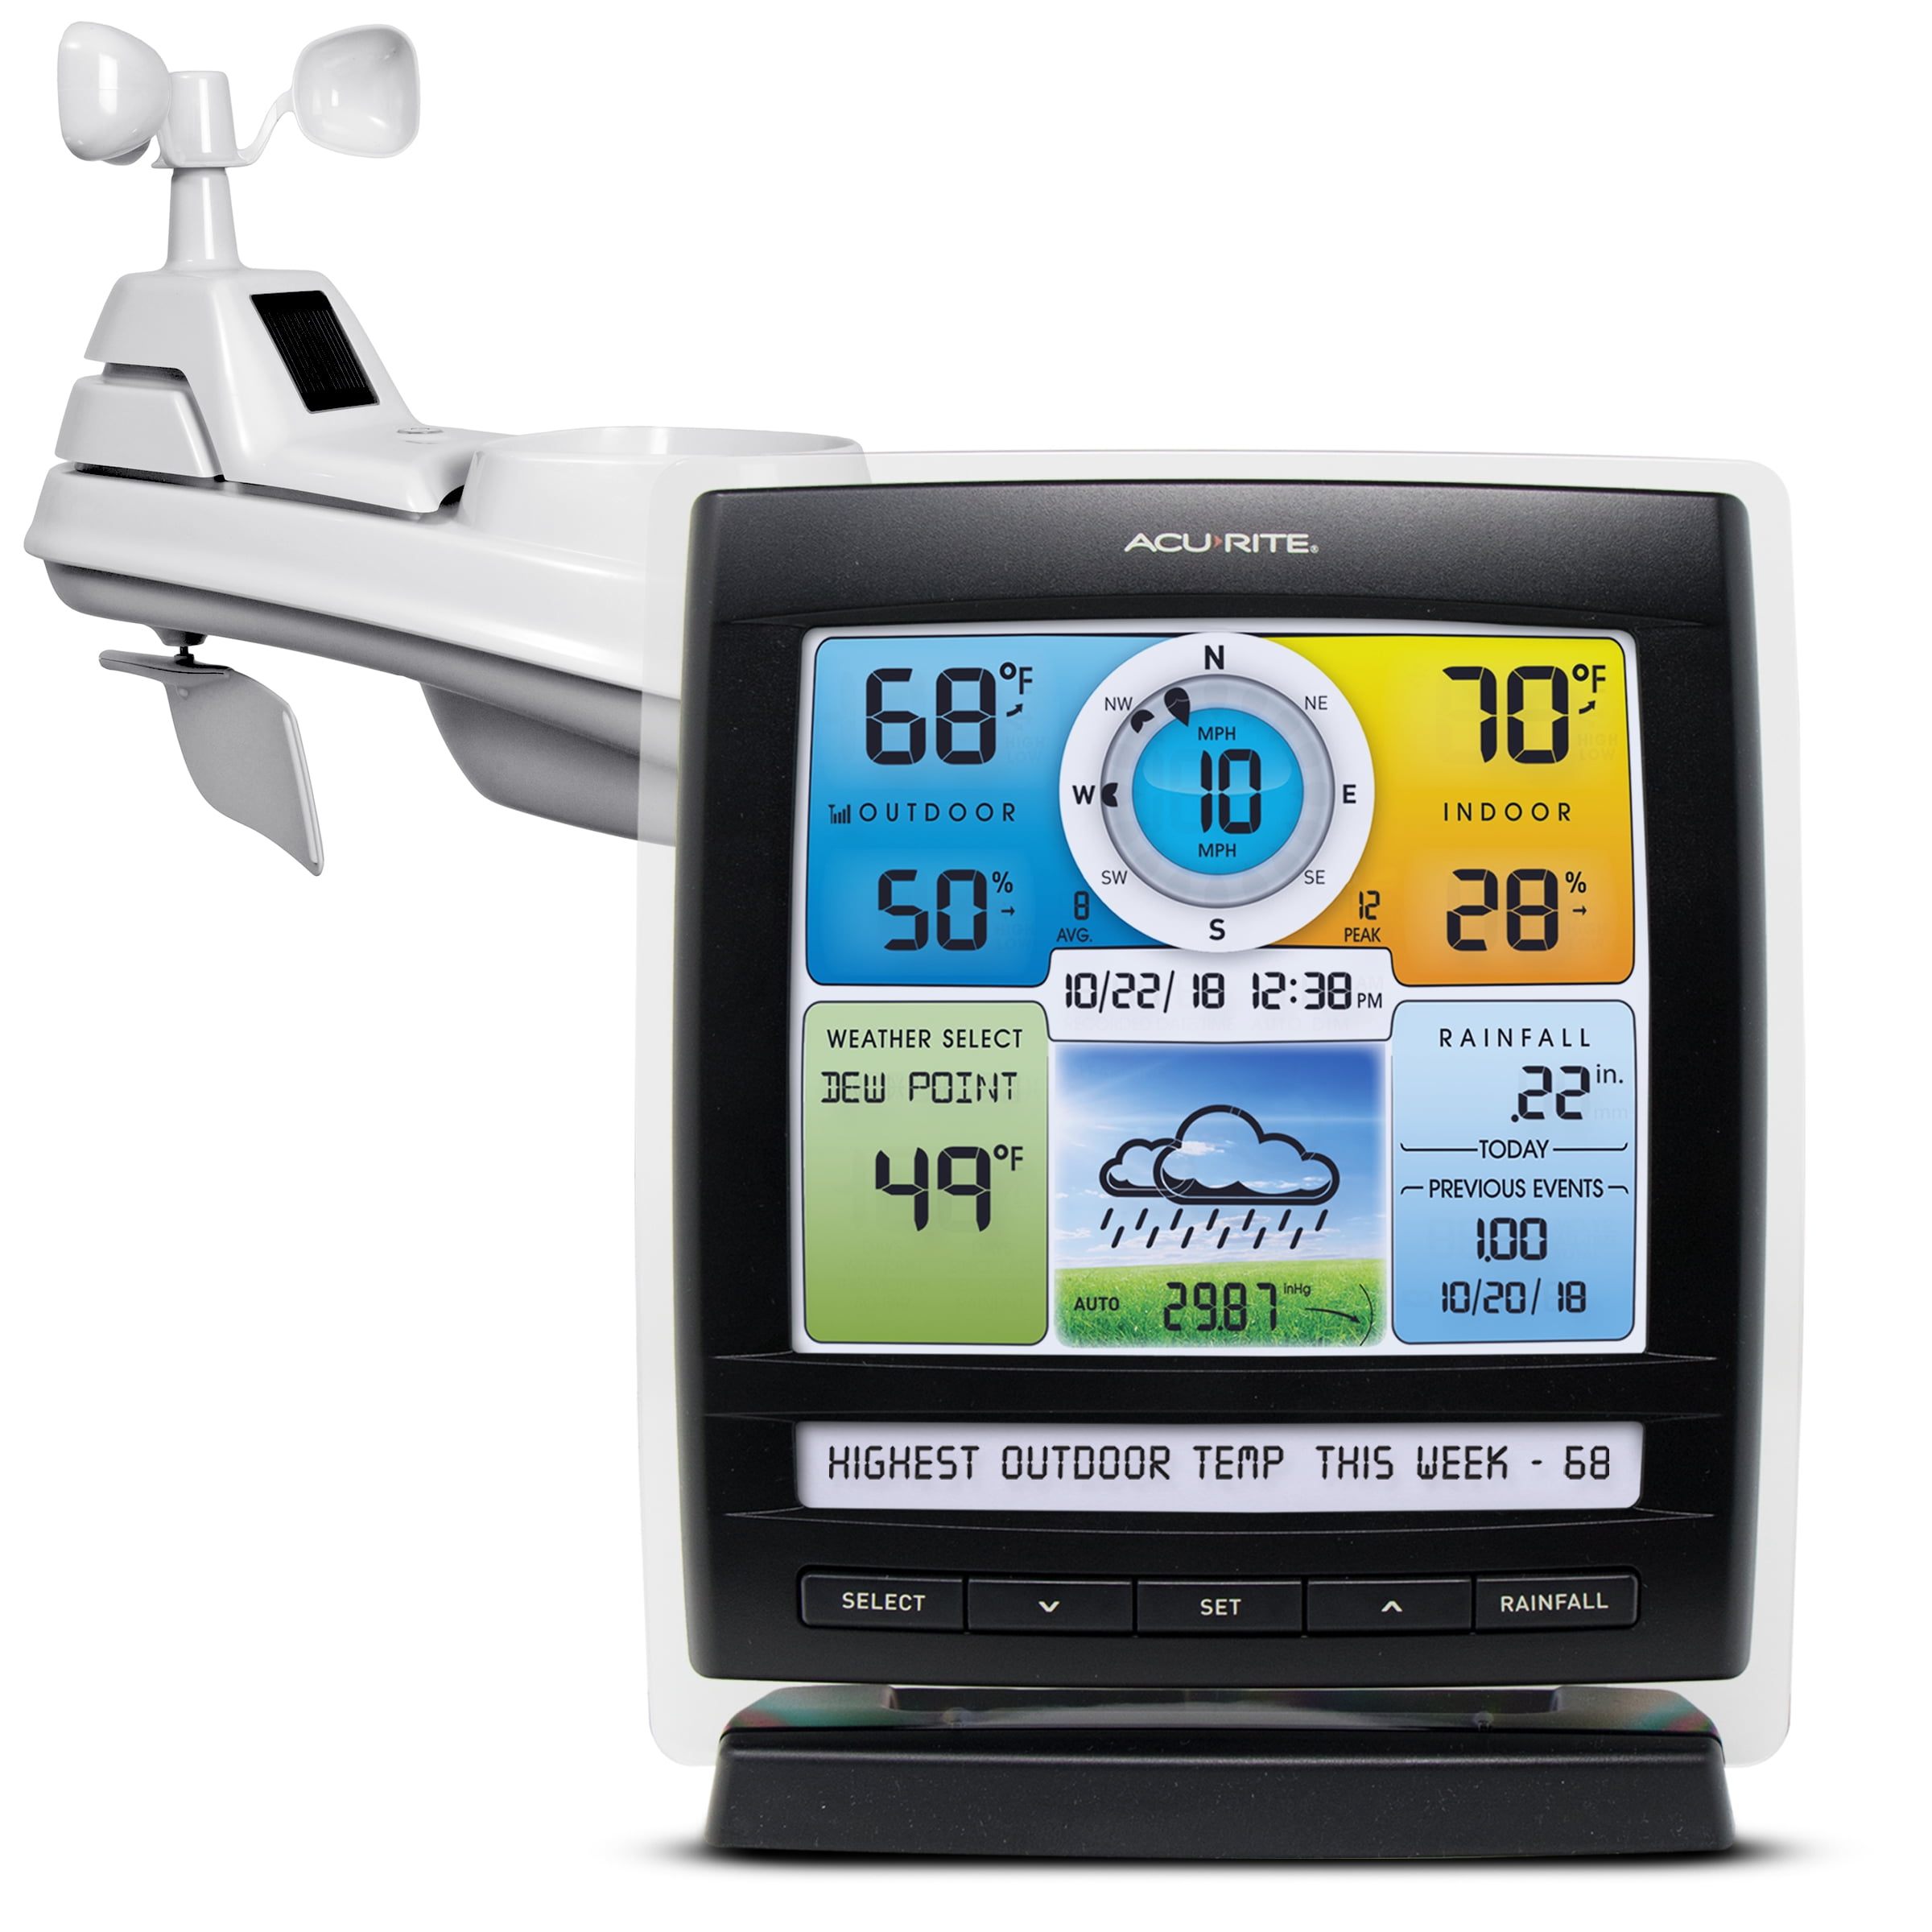 AcuRite Sportsman's Forecaster with Hunting & Fishing Activity